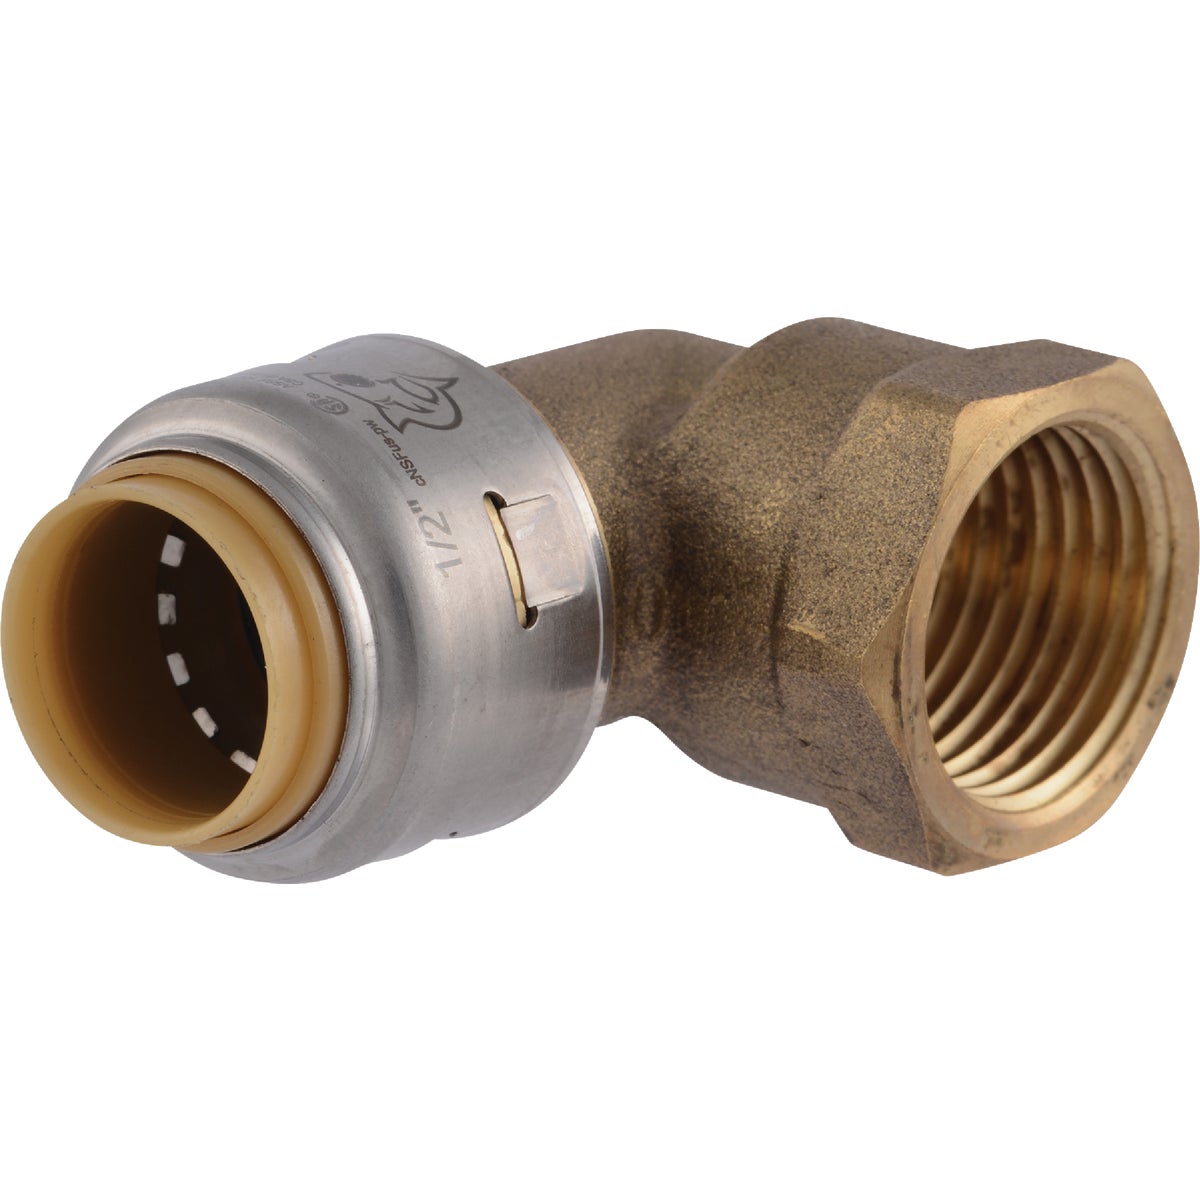 Item 464376, SharkBite Max push-to-connect fittings allow you make pipe connections with